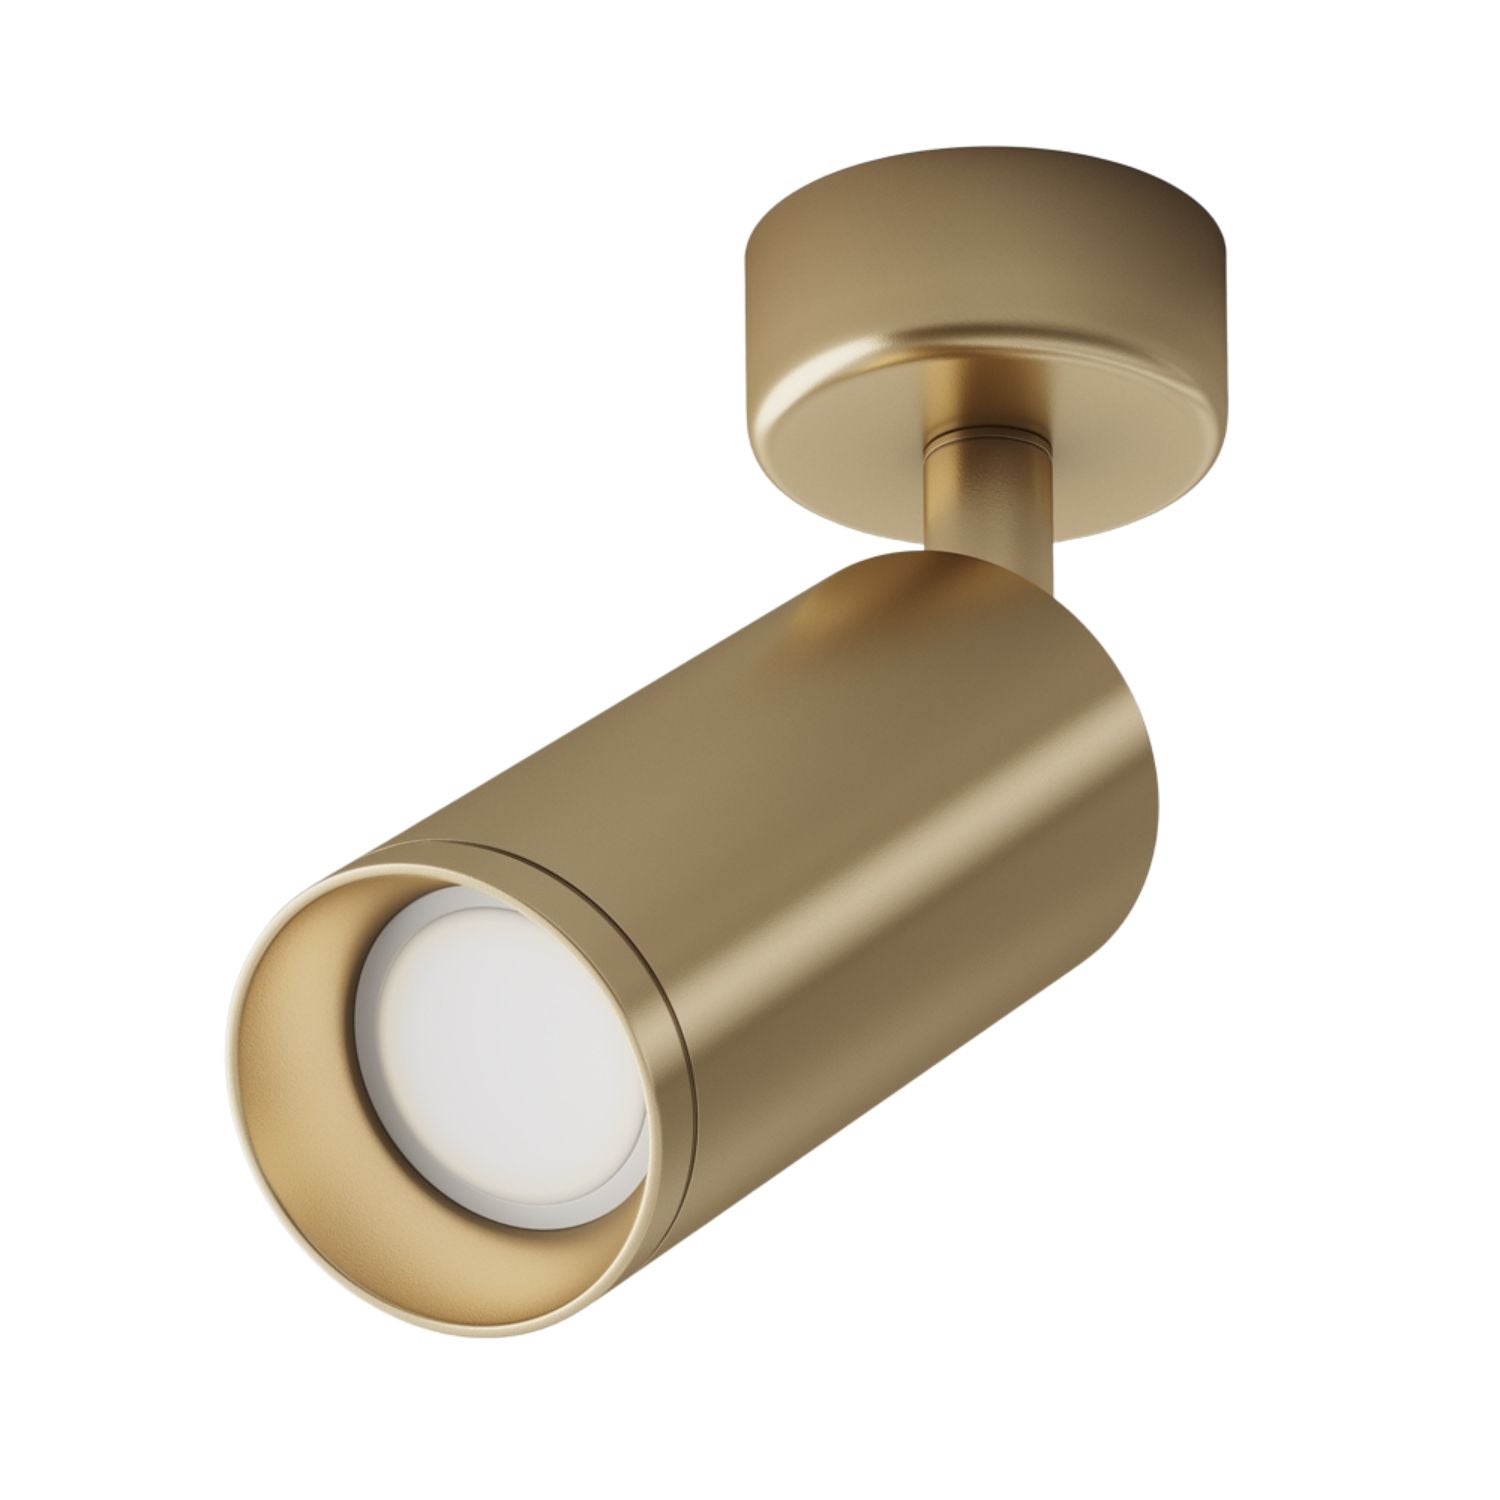 FOCUS - Adjustable surface-mounted spotlight in gold, black or white